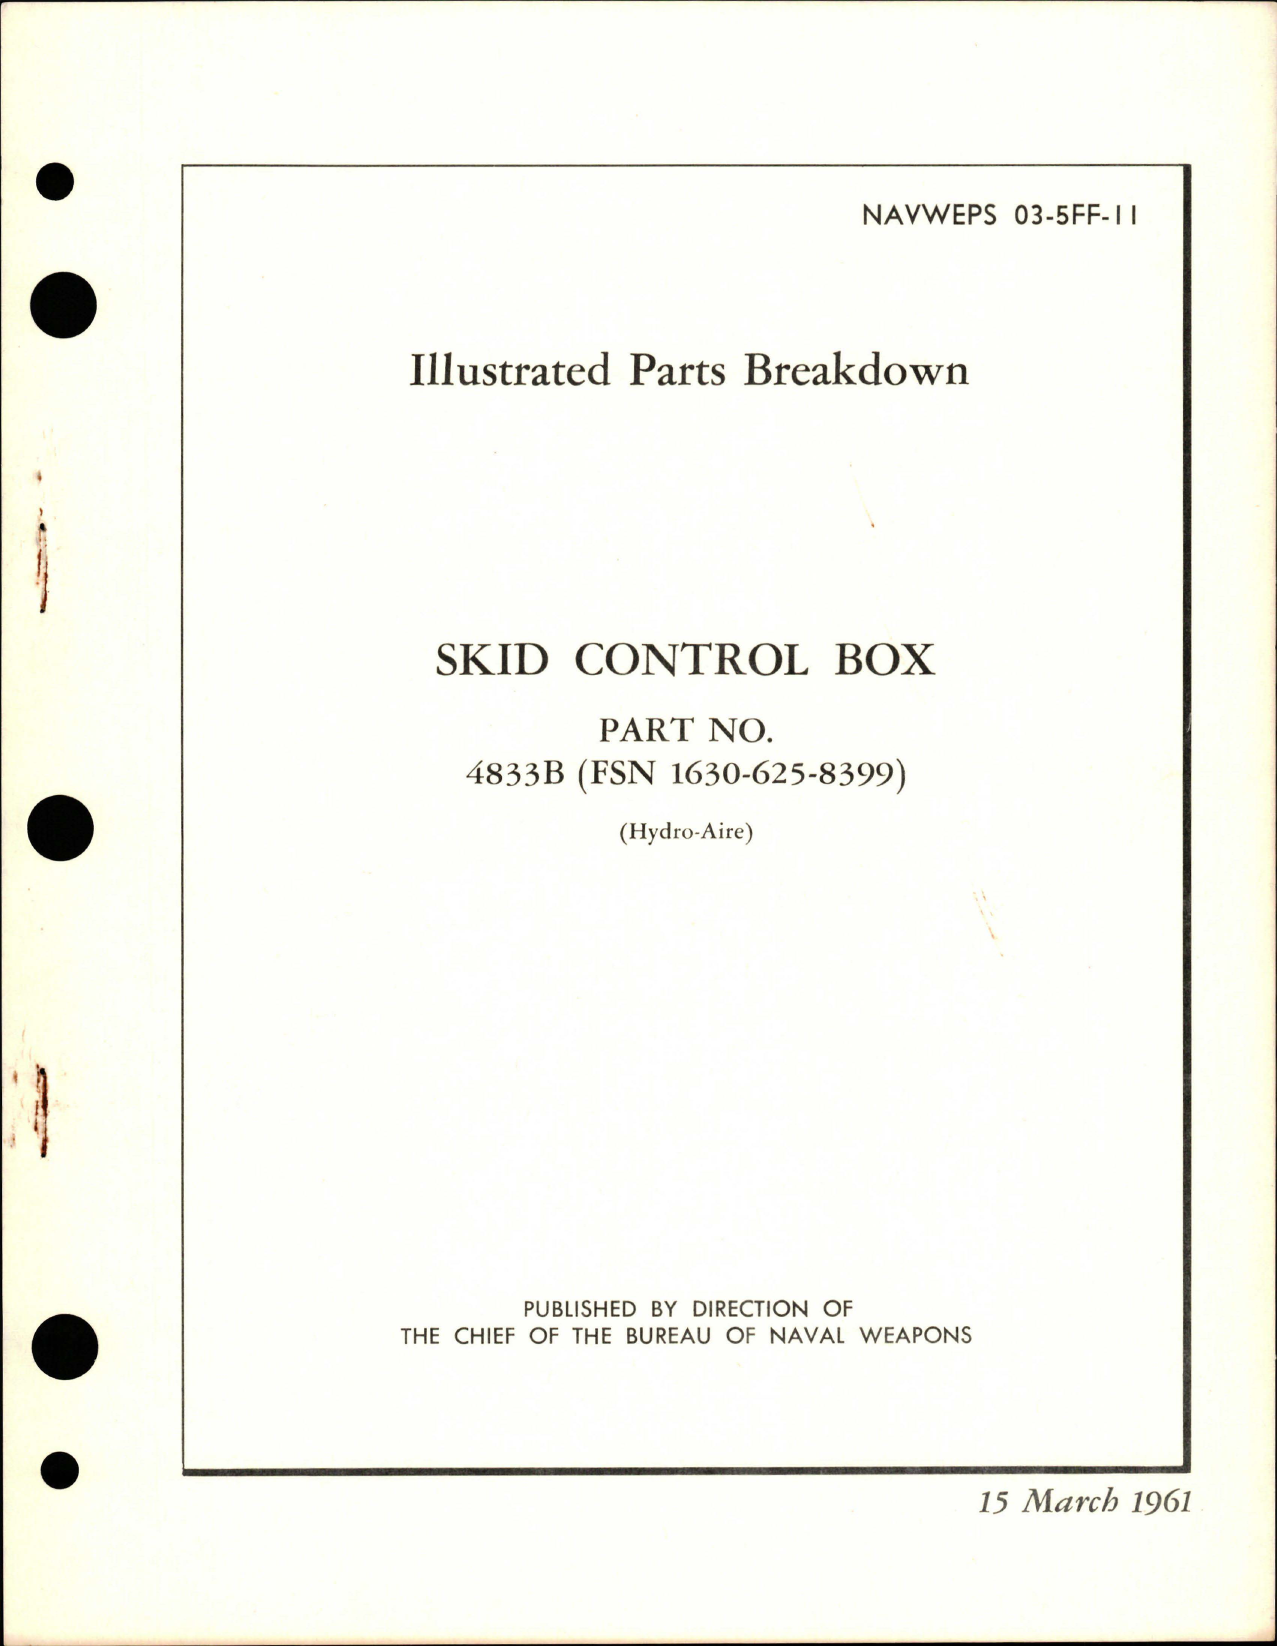 Sample page 1 from AirCorps Library document: Illustrated Parts Breakdown for Skid Control Box - Part 4833B